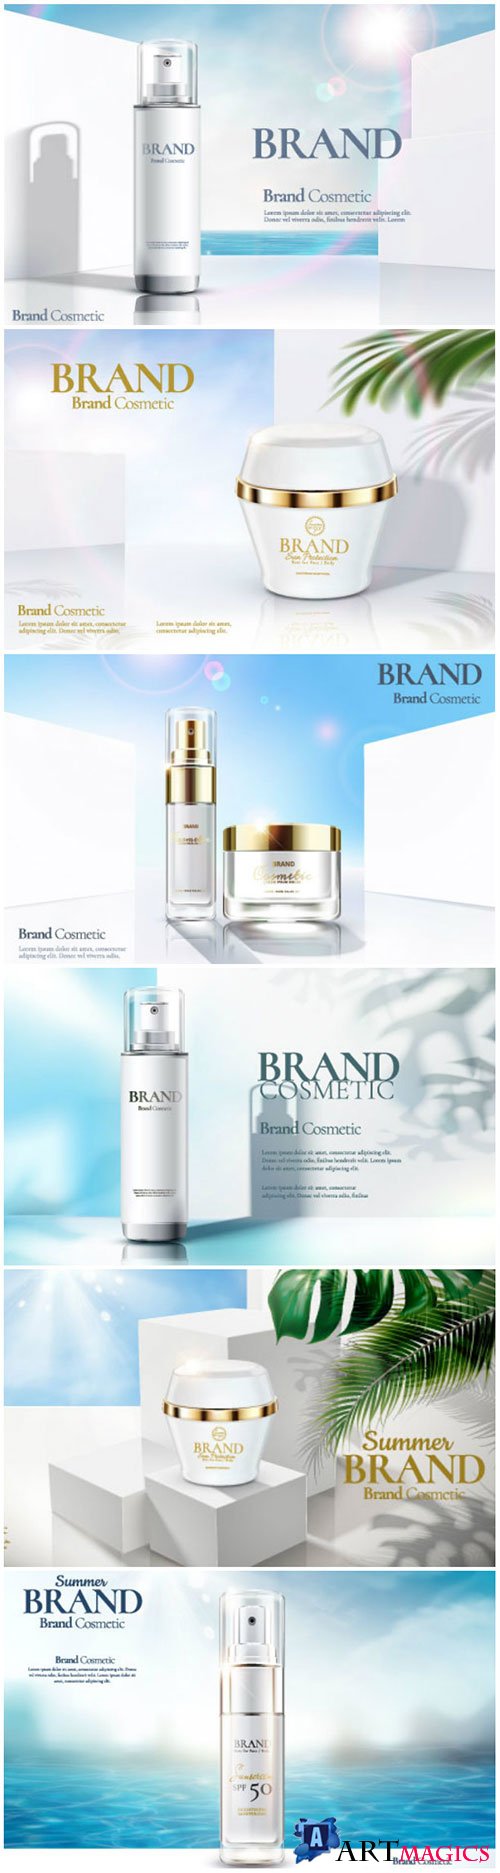 Brand cosmetic design, foundation banner ads # 5